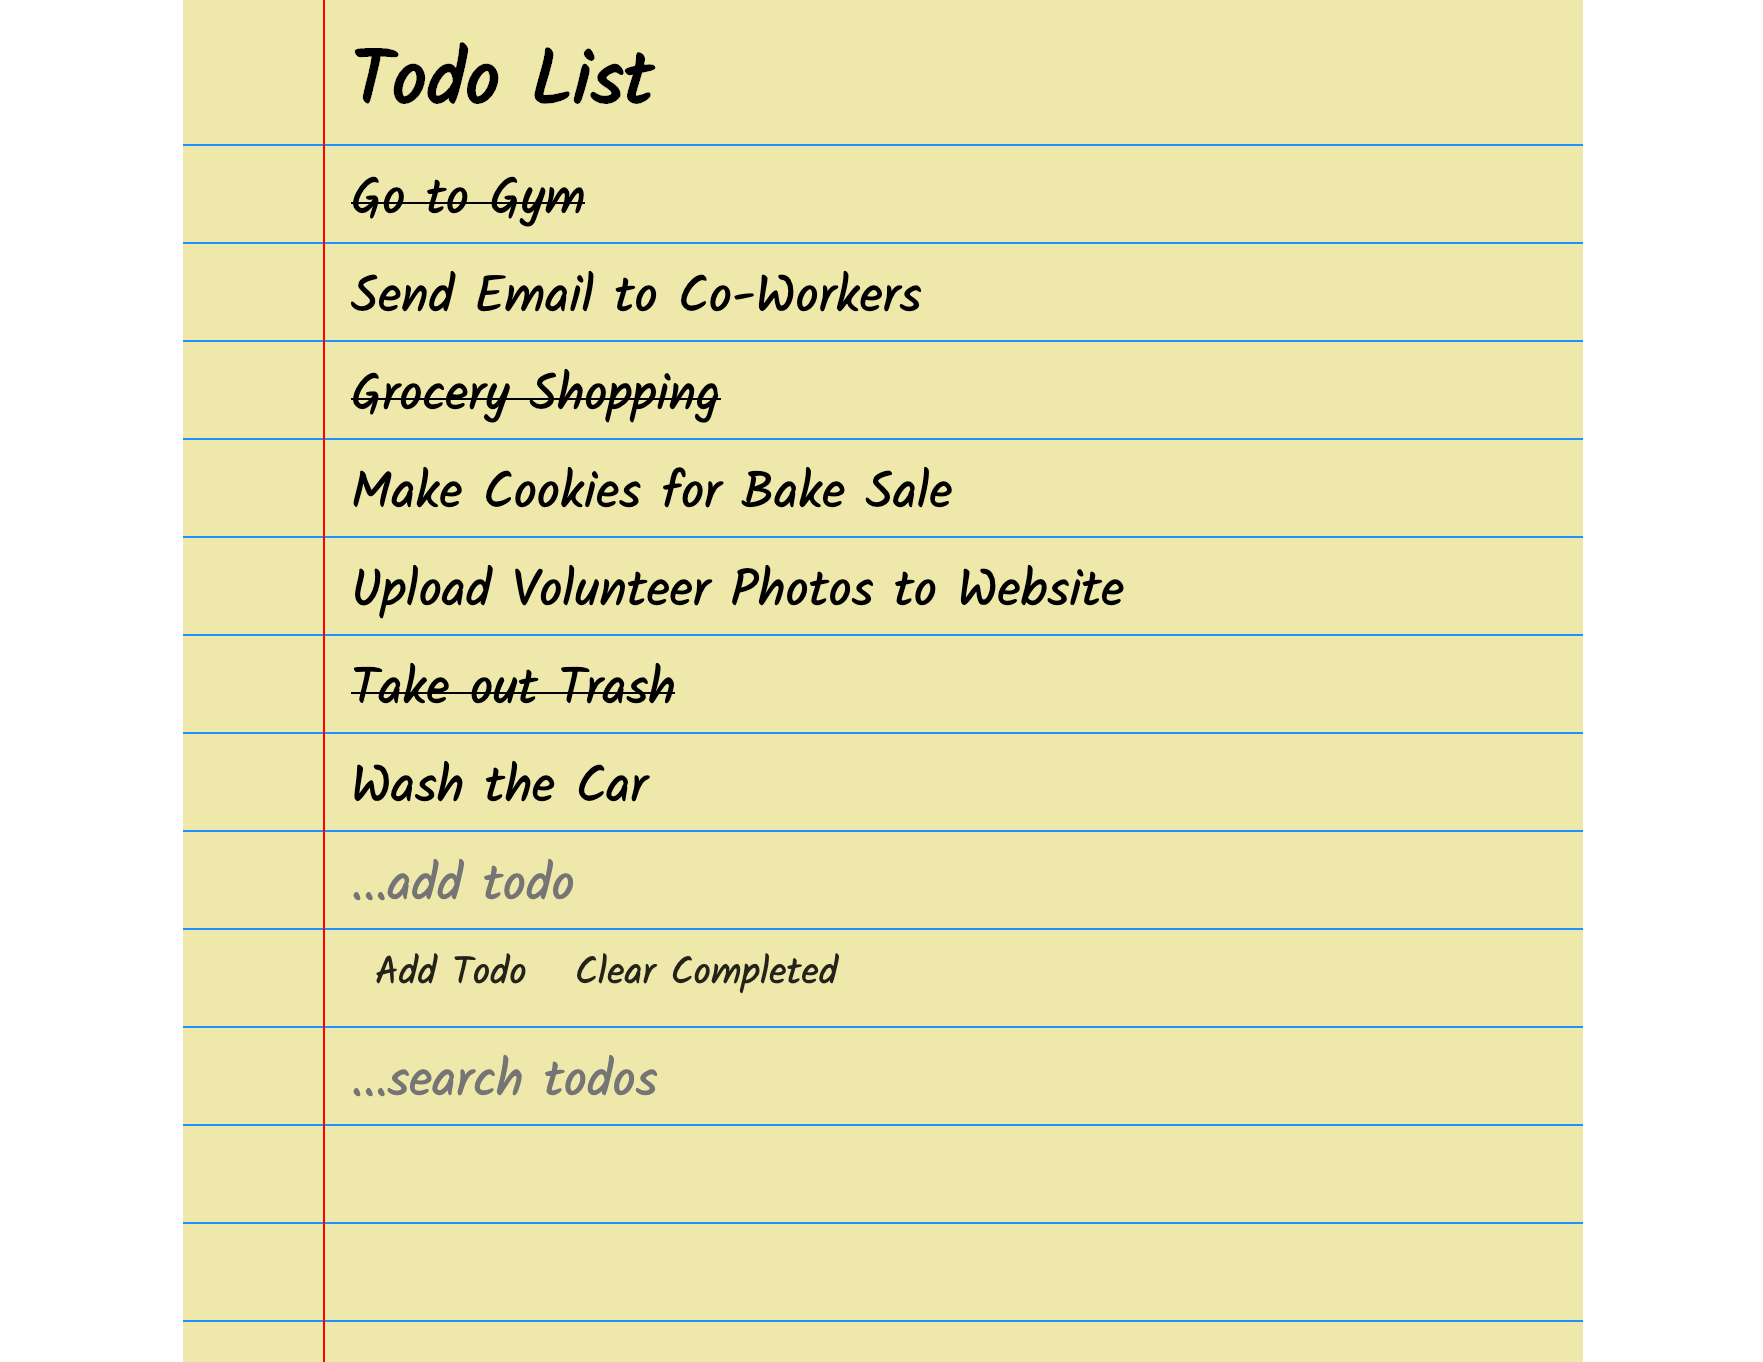 Todo list front end application